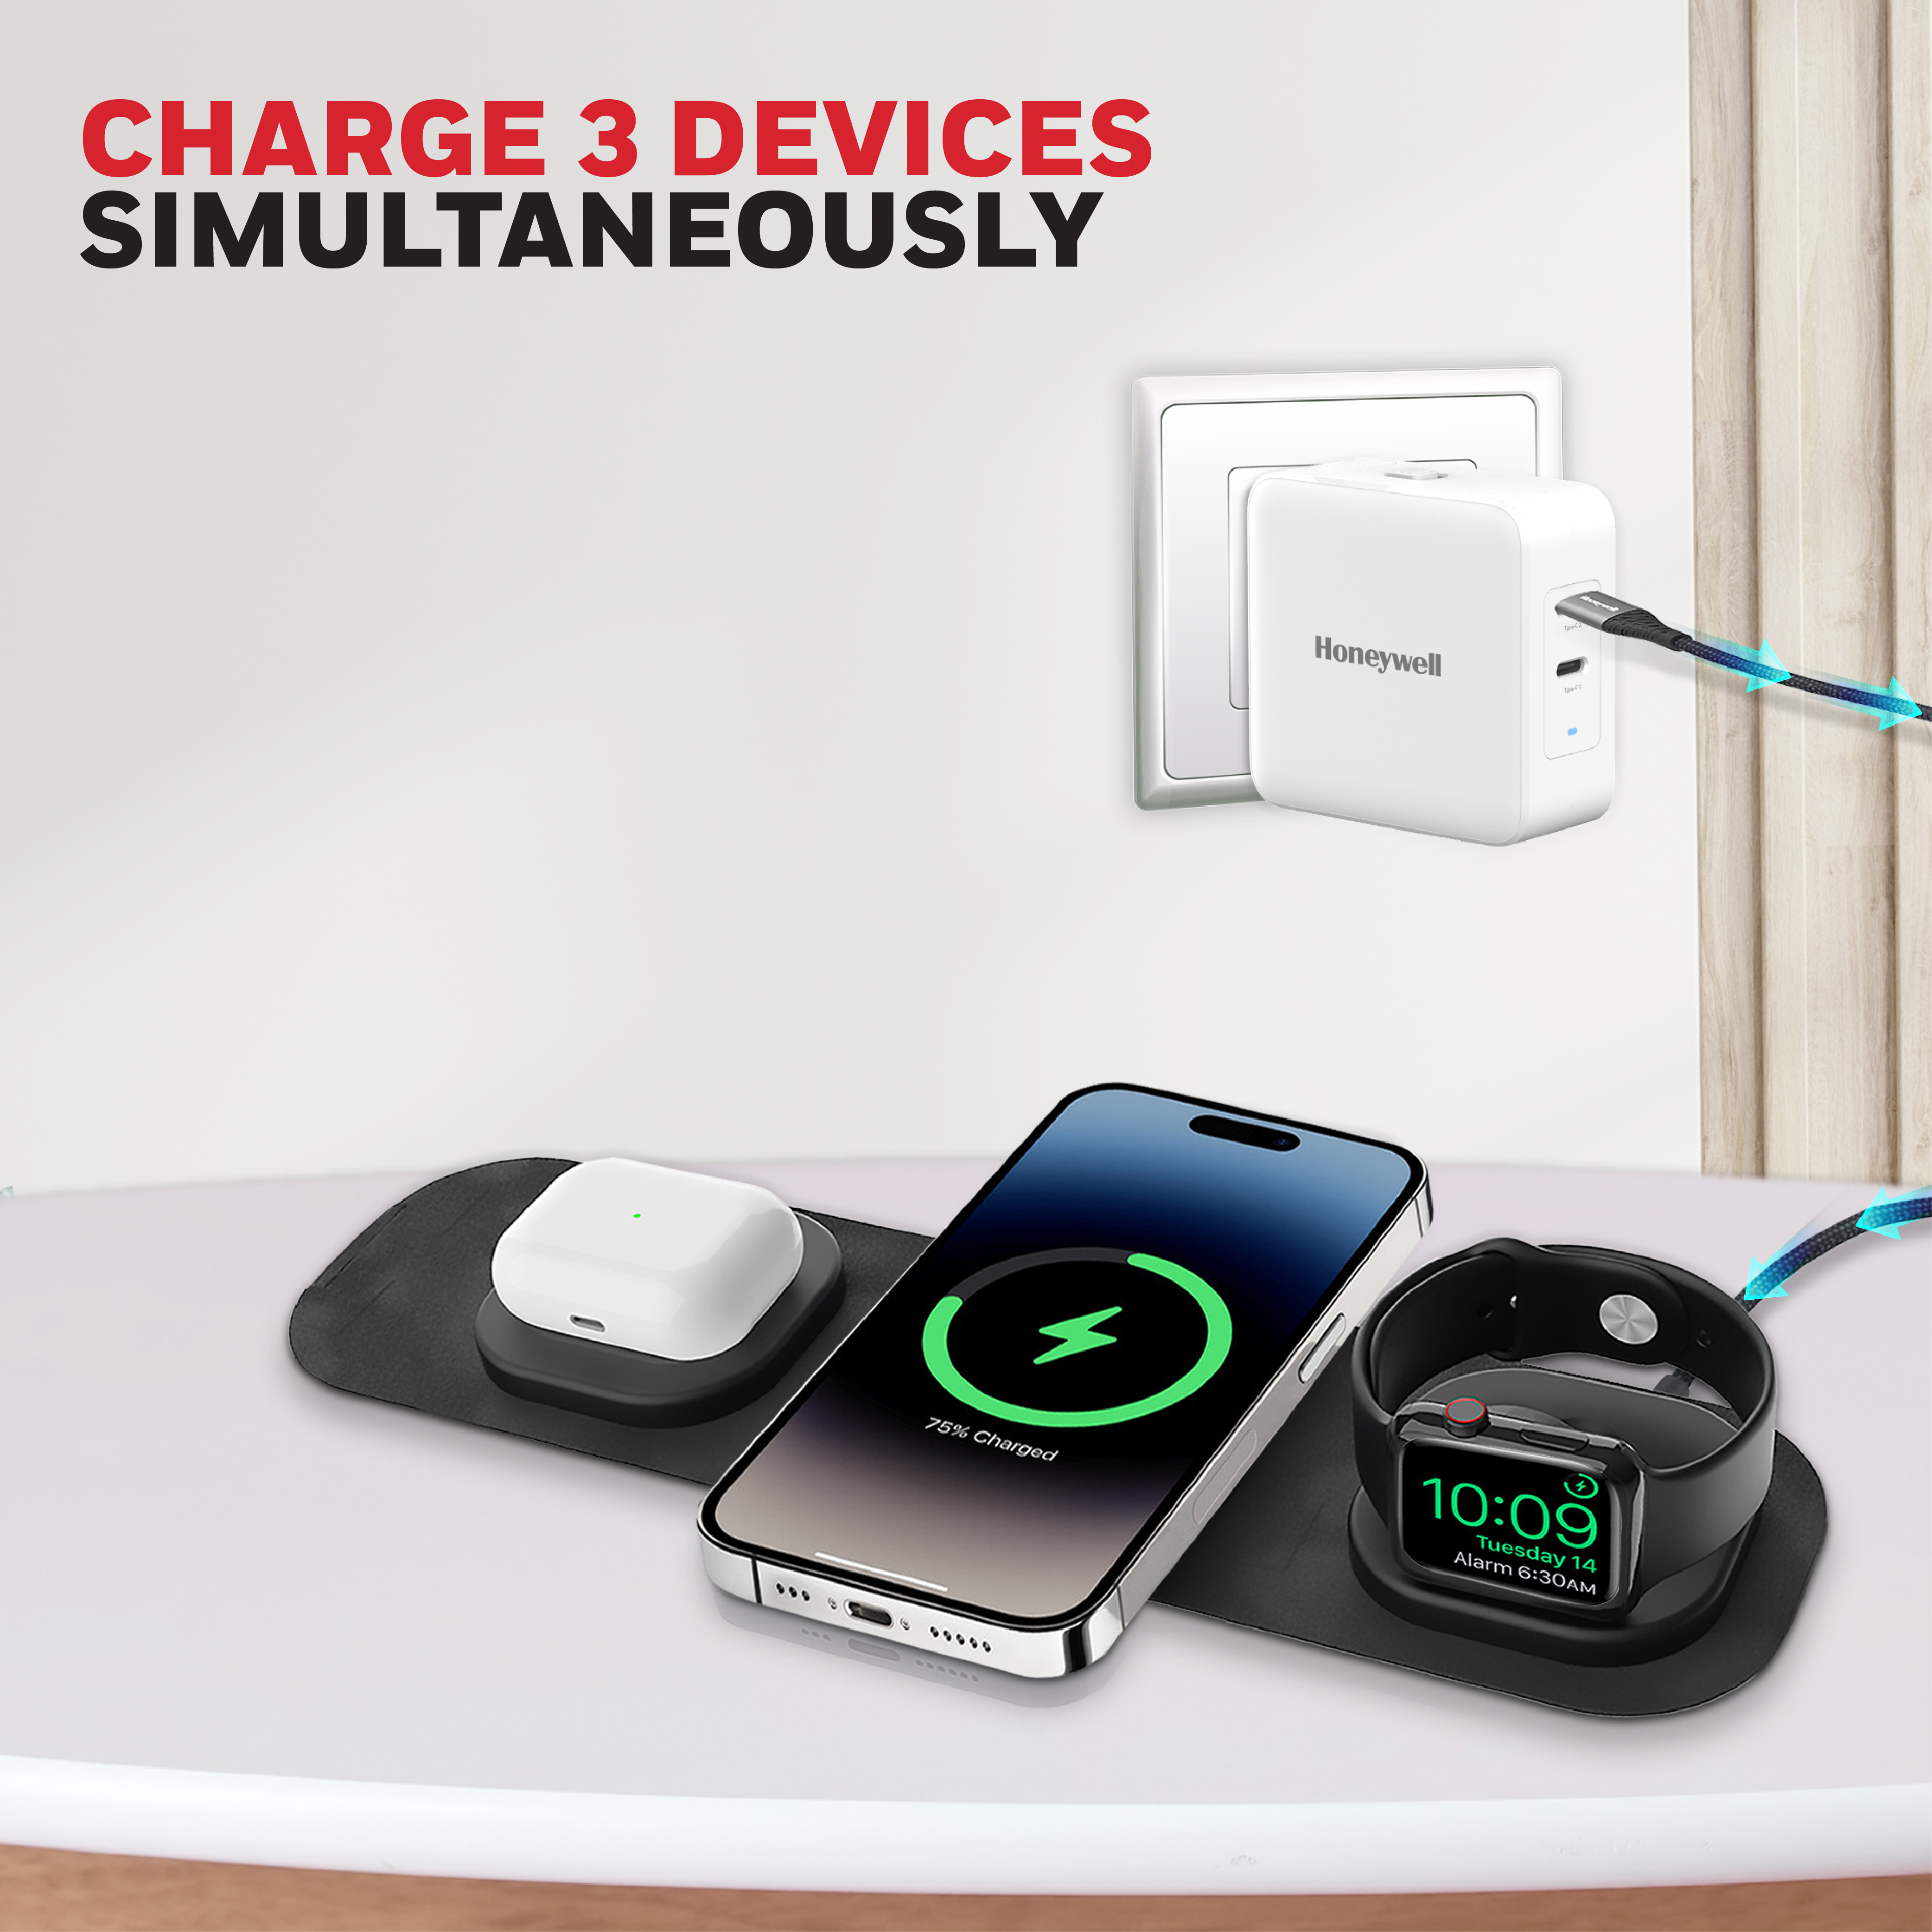 Honeywell Zest Wireless 3-in-1 Magnetic Foldable MagSafe Compatible 23W Wireless Charger